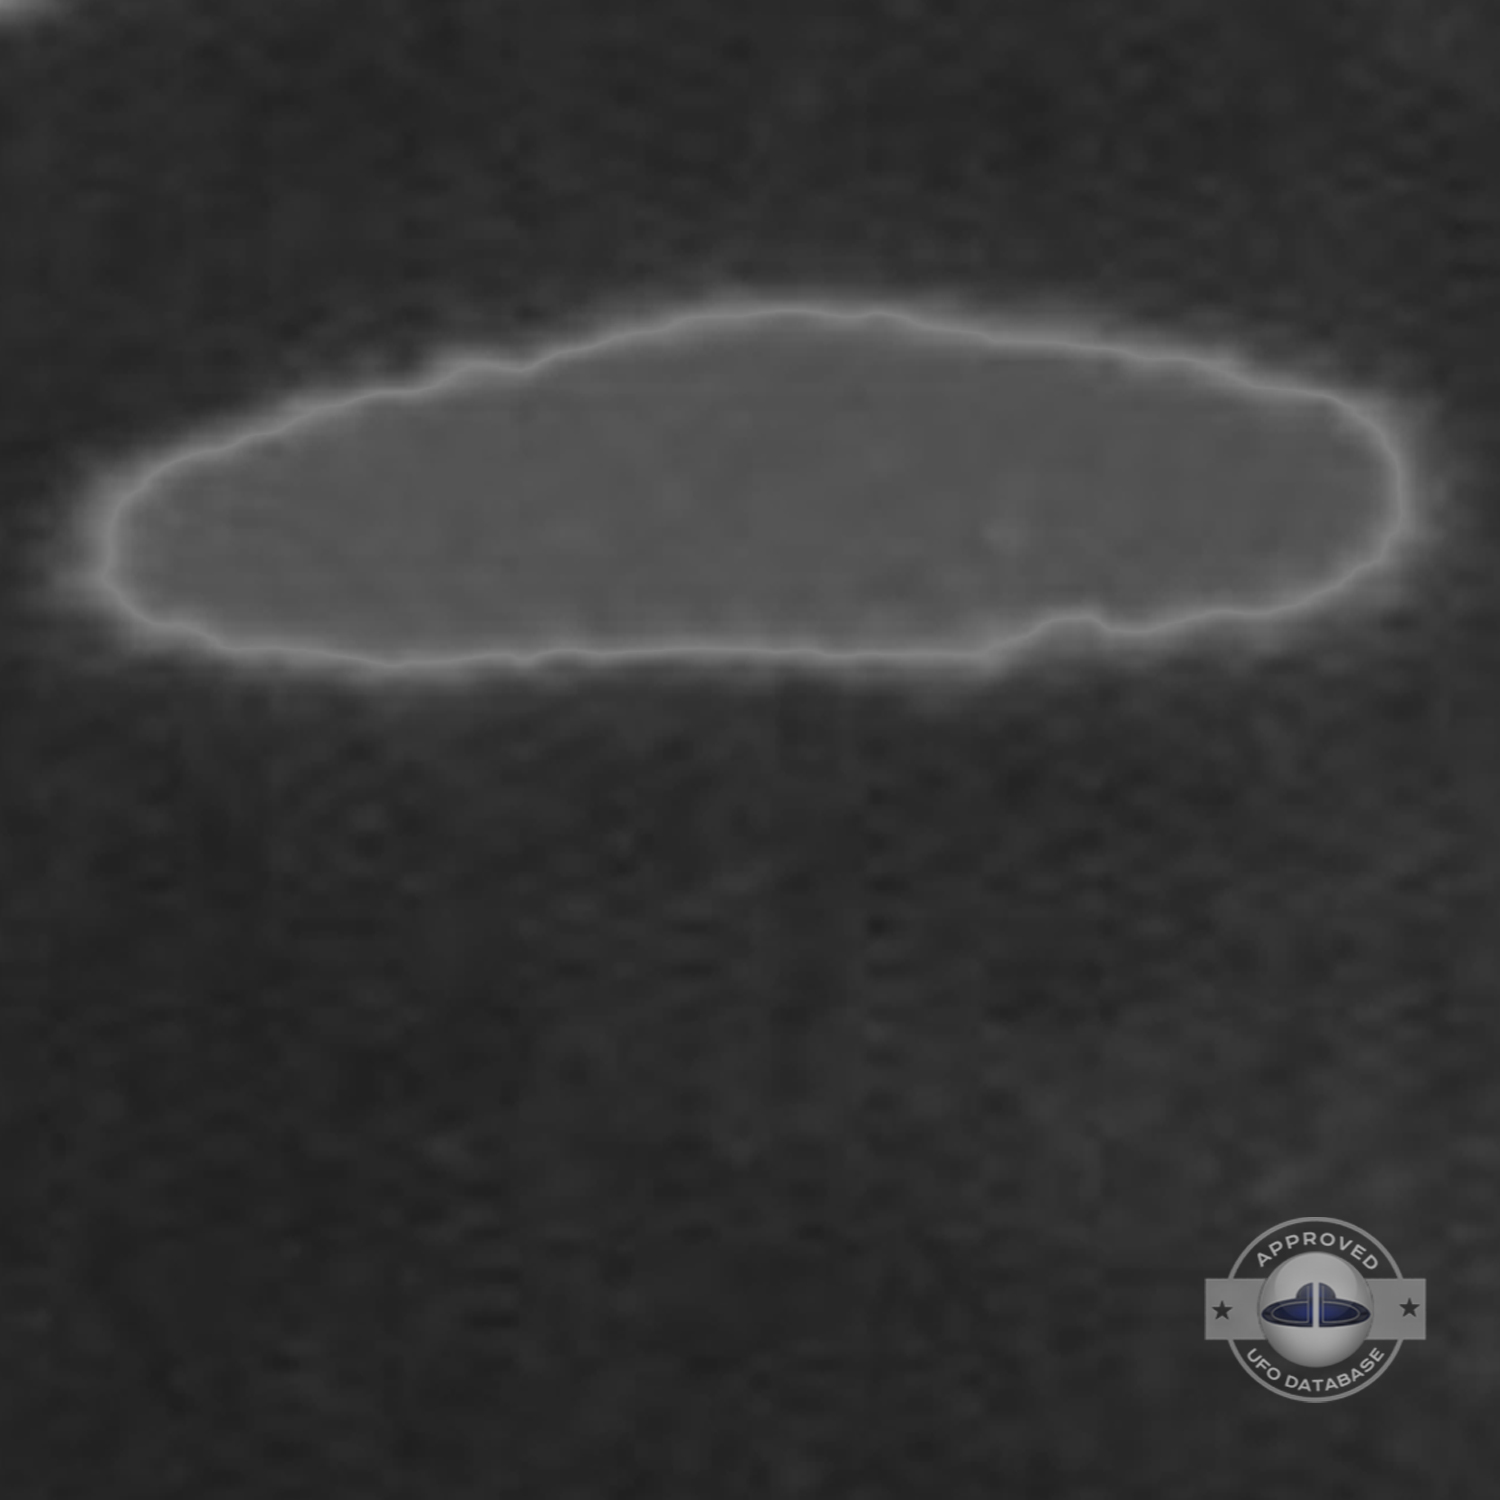 3 dark saucer shape UFOs near church in cathedral square of Sicuani UFO Picture #131-9